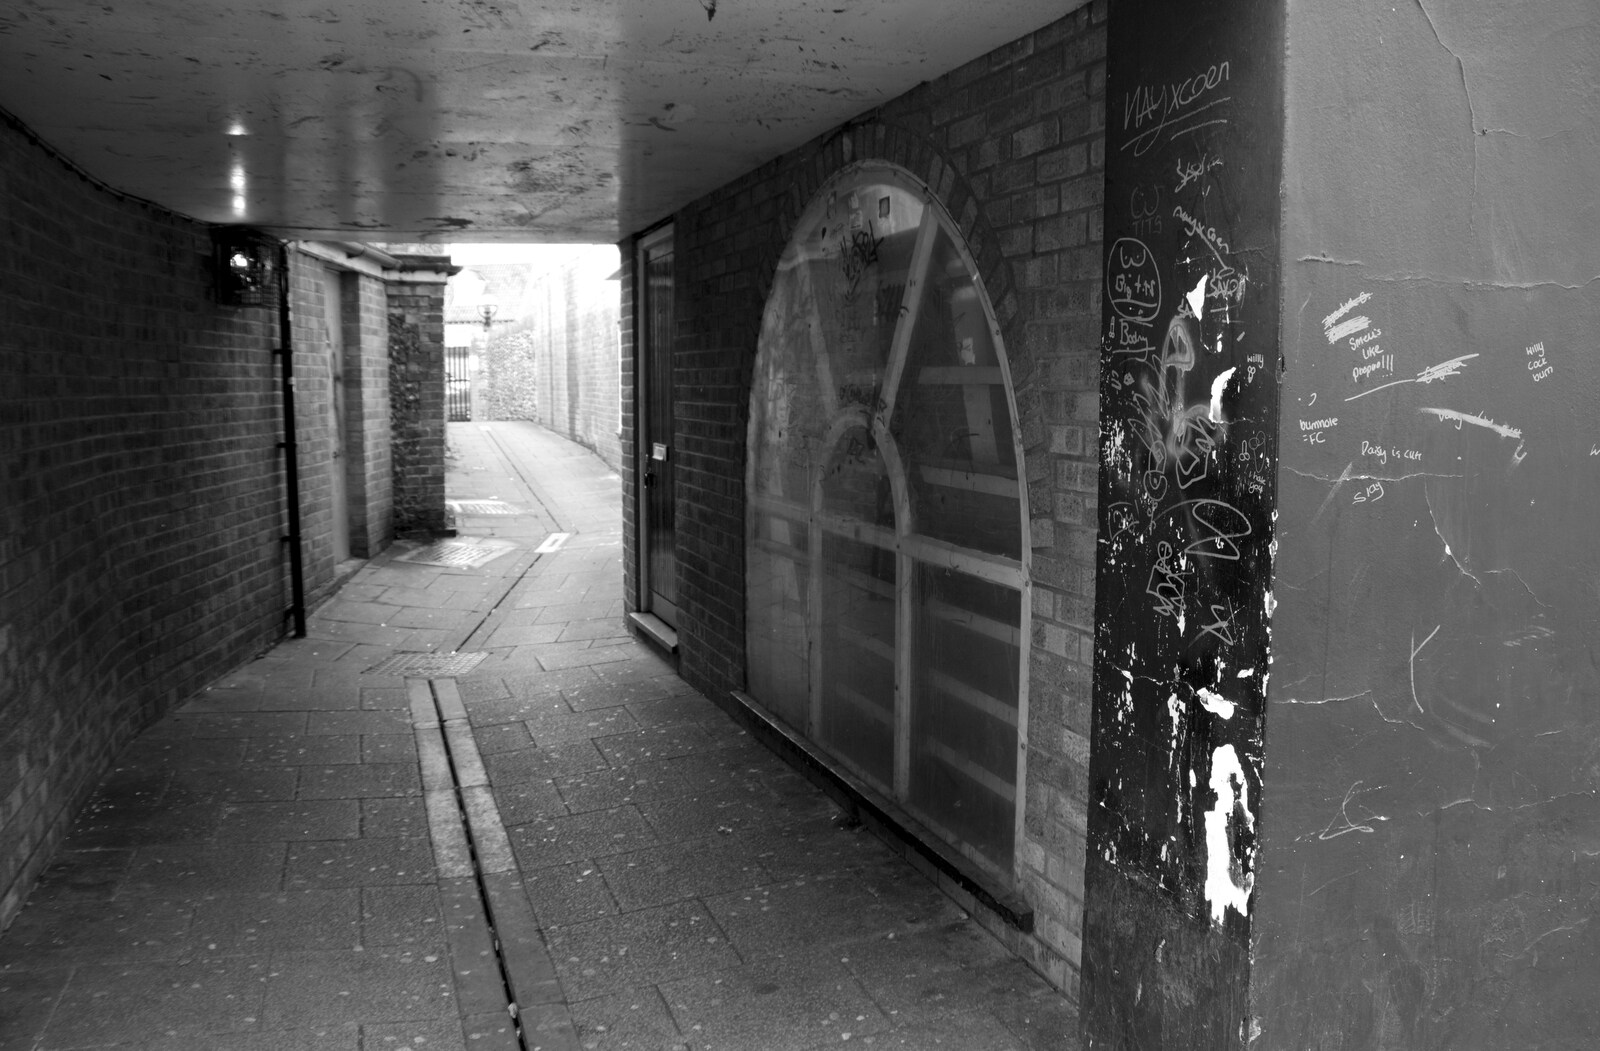 An alleyway off White Hart Street from A Postcard from Thetford, Norfolk - 15th March 2023